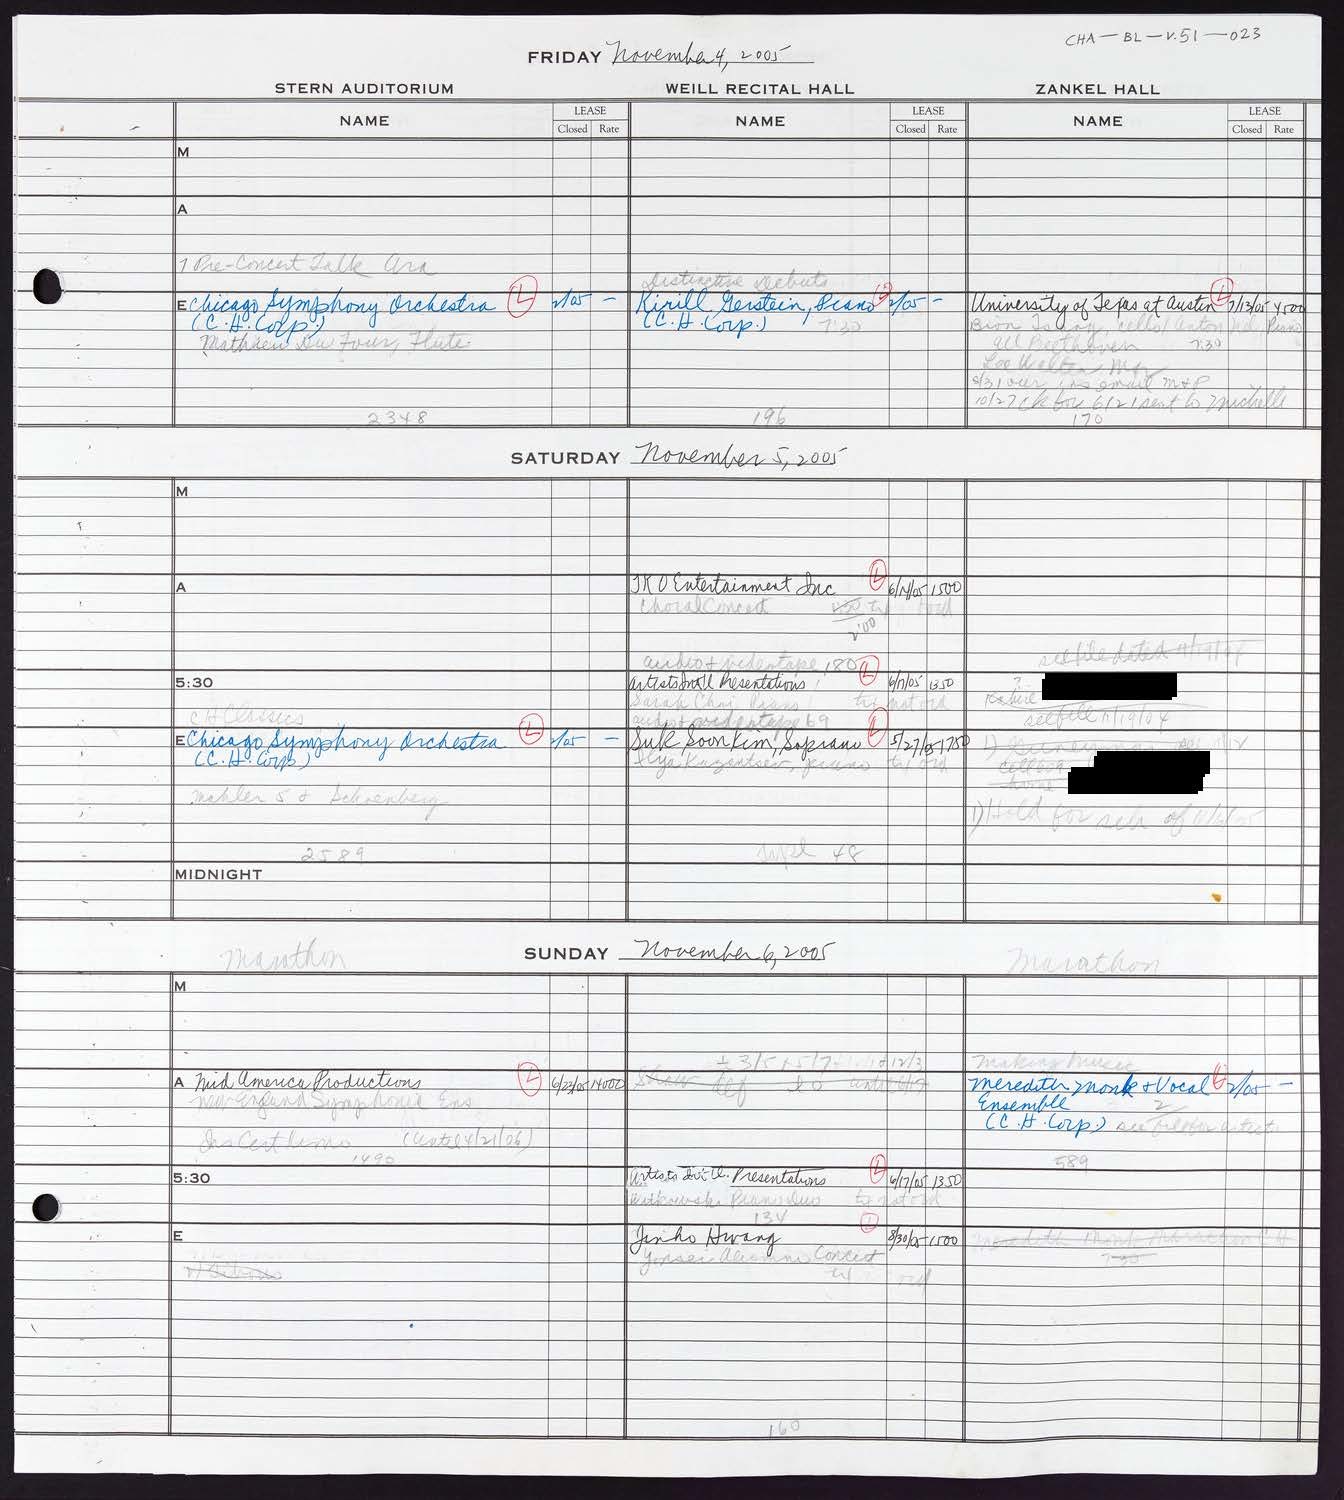 Carnegie Hall Booking Ledger, volume 51, page 23